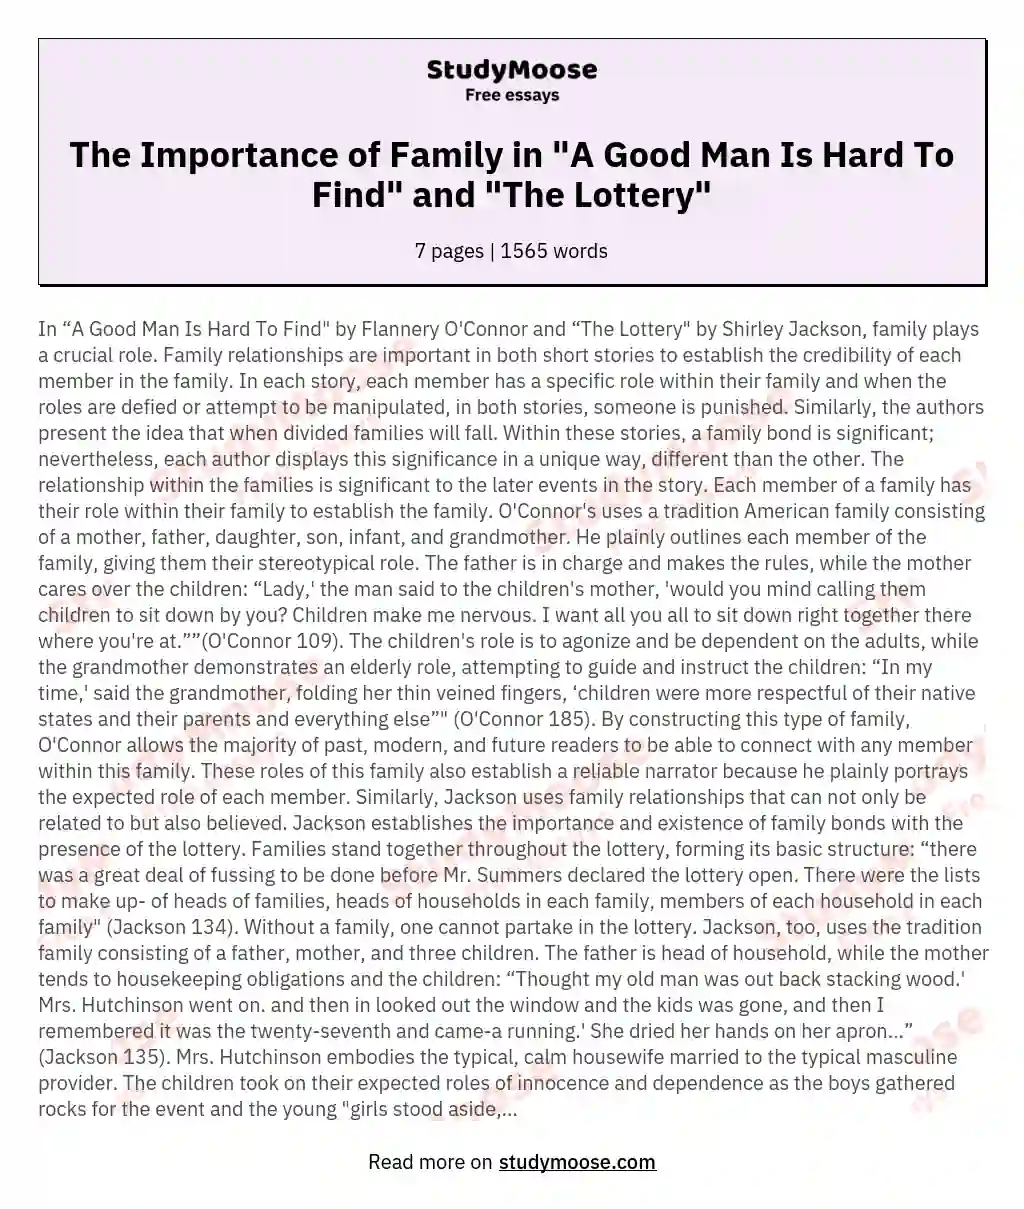 The Importance of Family in "A Good Man Is Hard To Find" and "The Lottery" essay